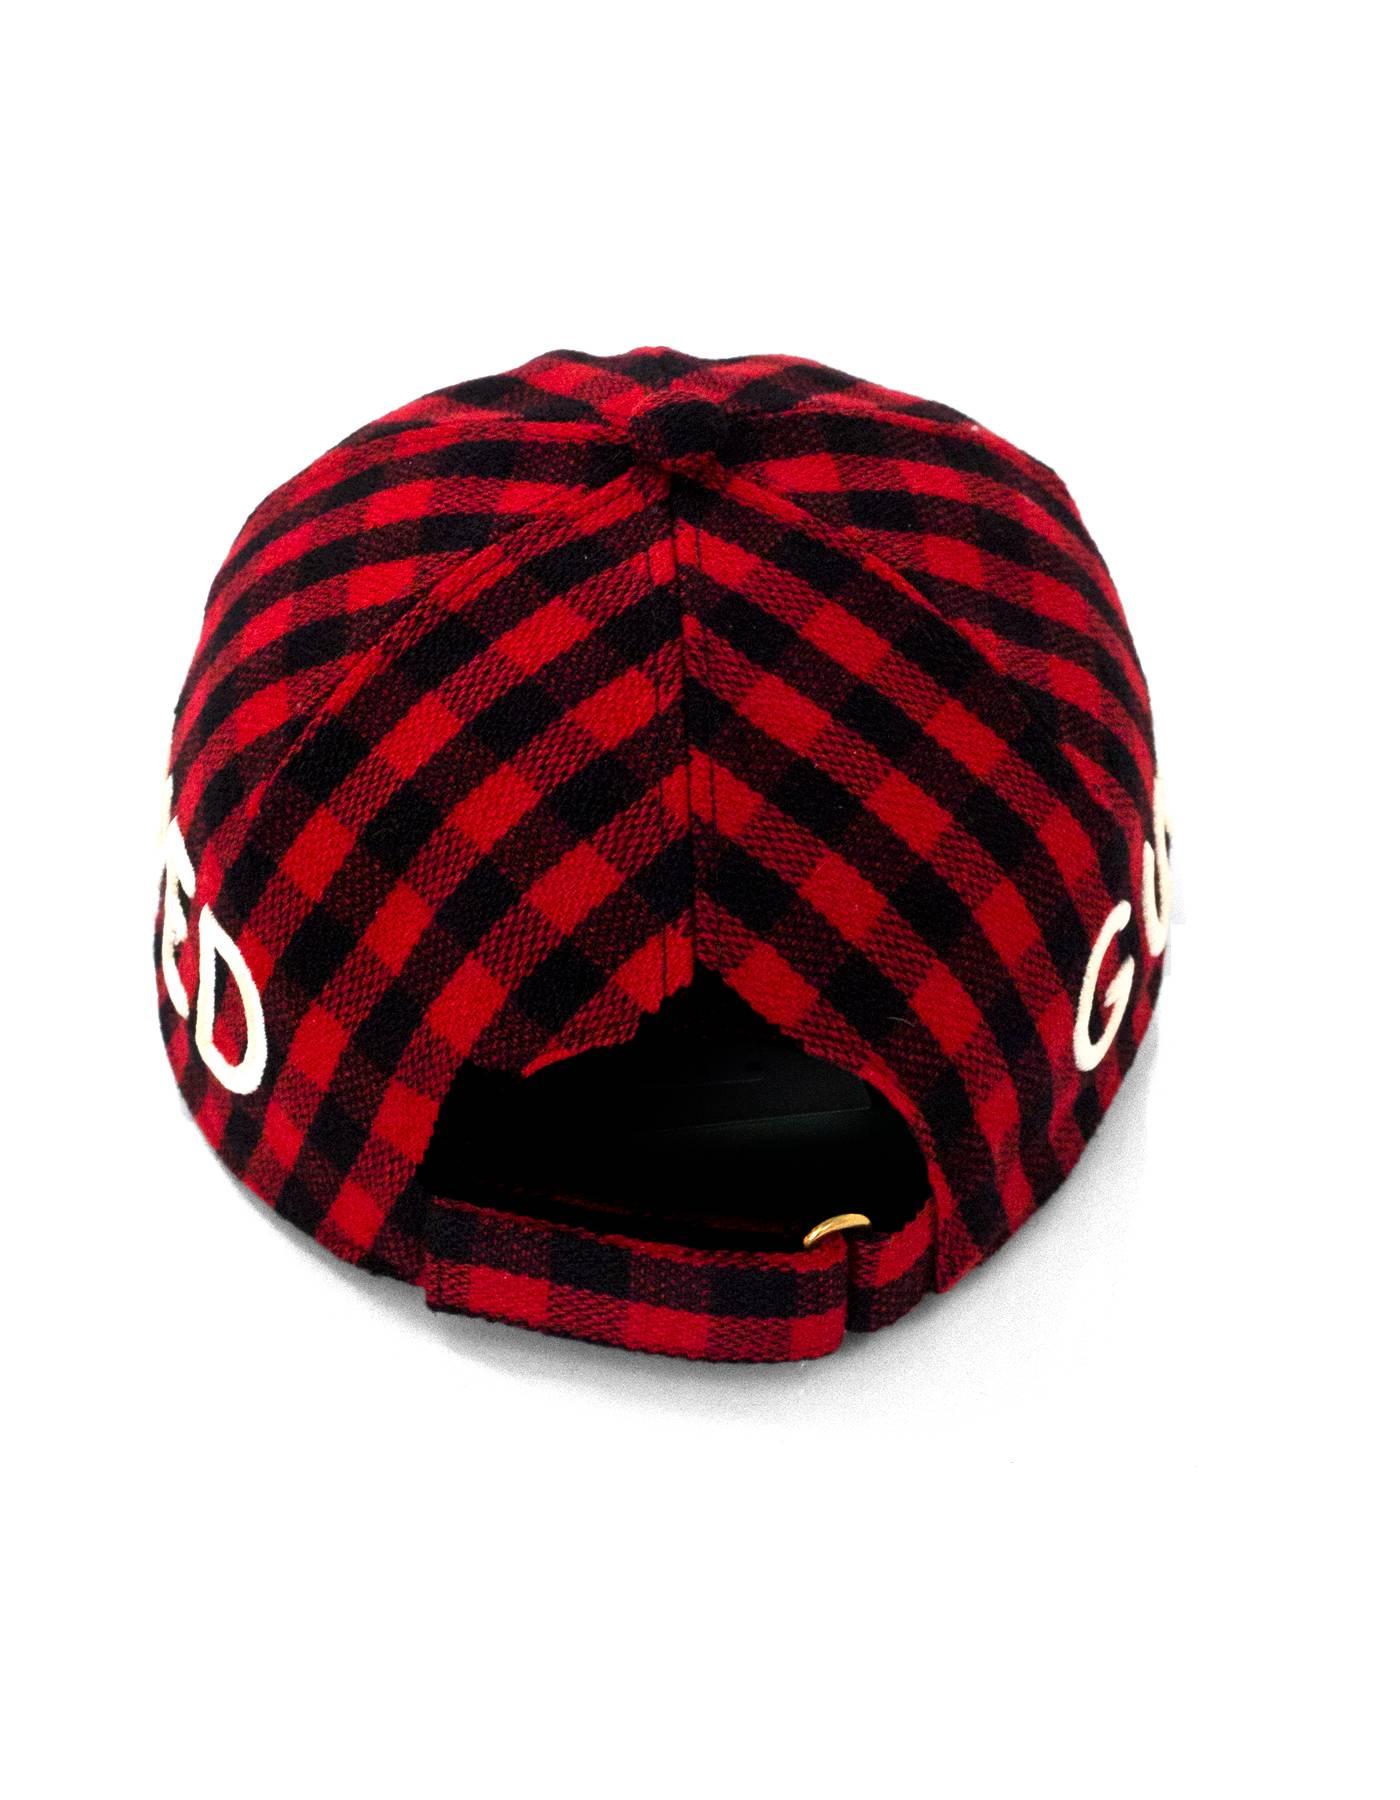 Gucci Black and Red Gingham Flannel Loved Baseball Cap sz M/58 For 